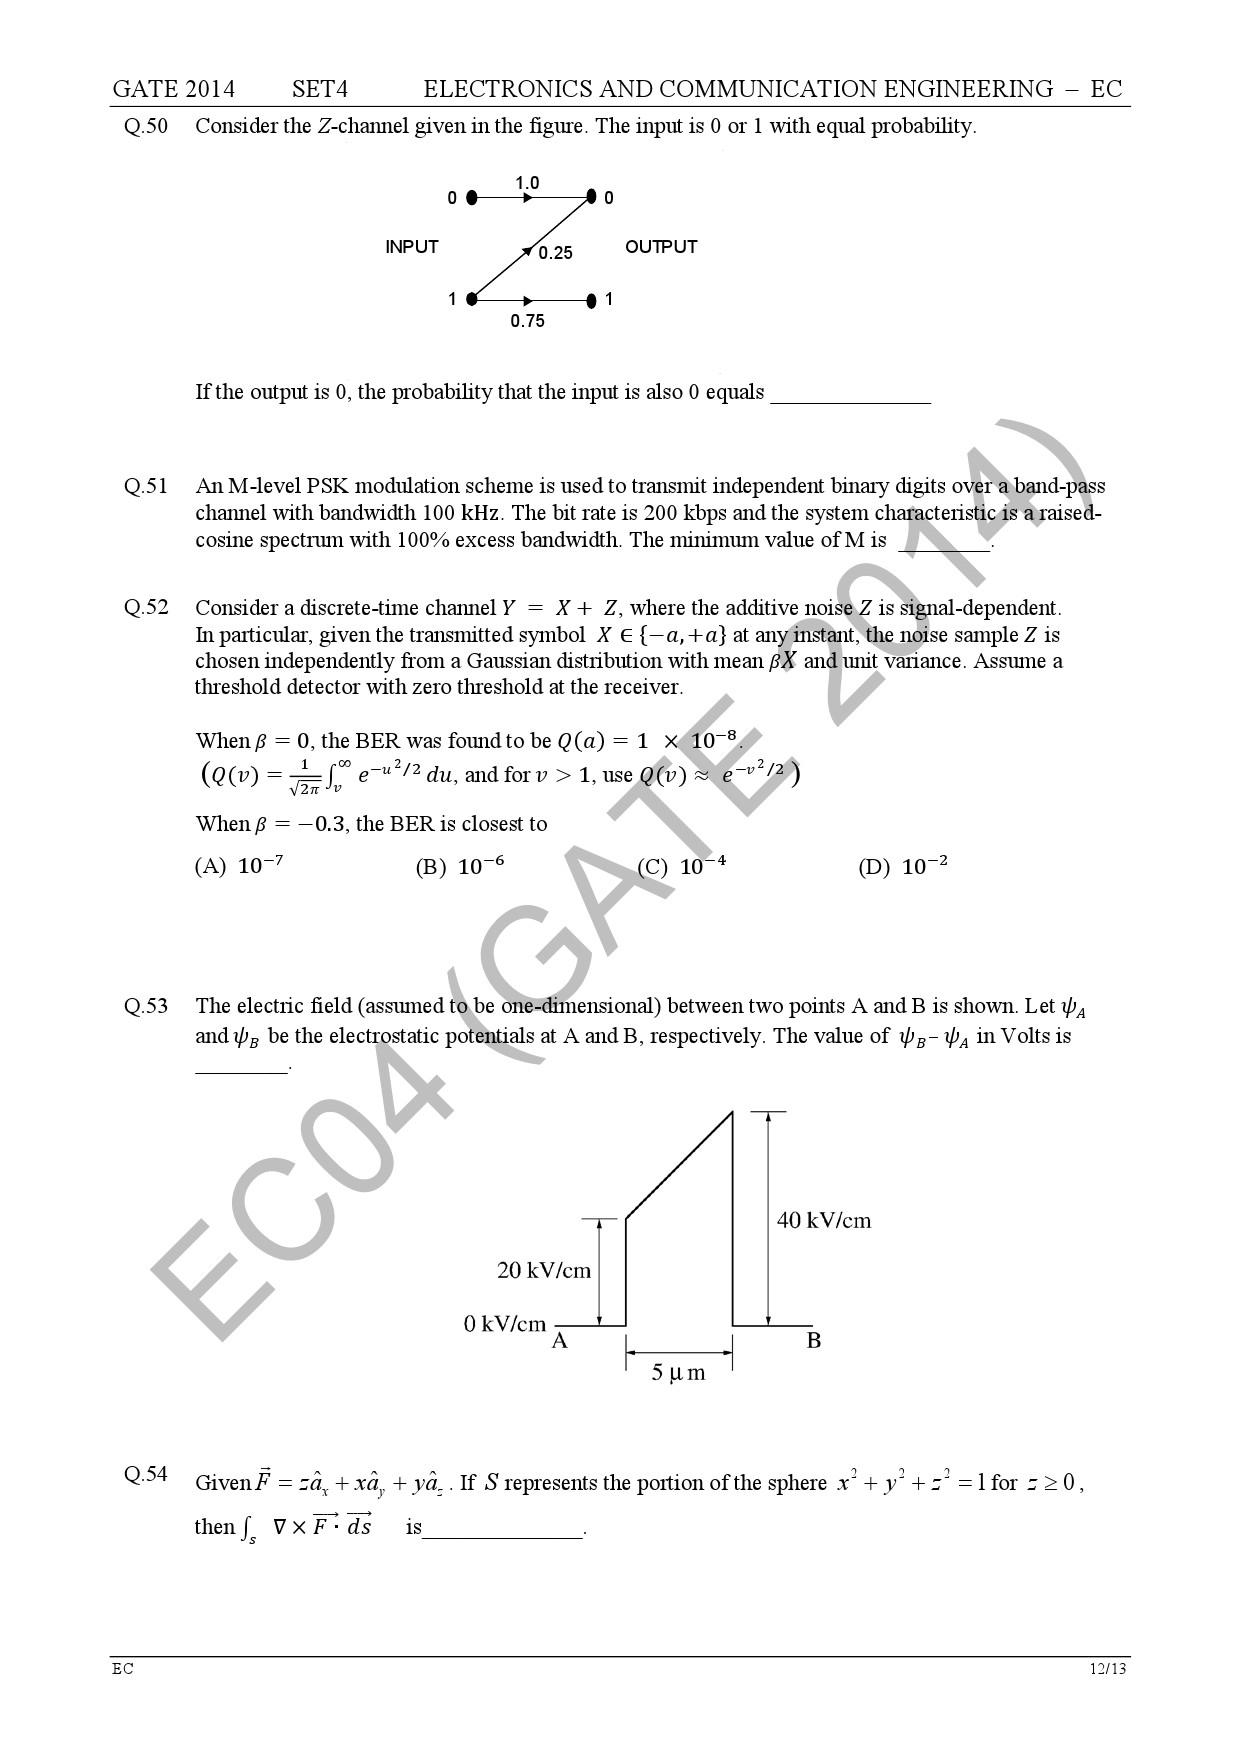 GATE Exam Question Paper 2014 Electronics and Communication Engineering Set 4 18